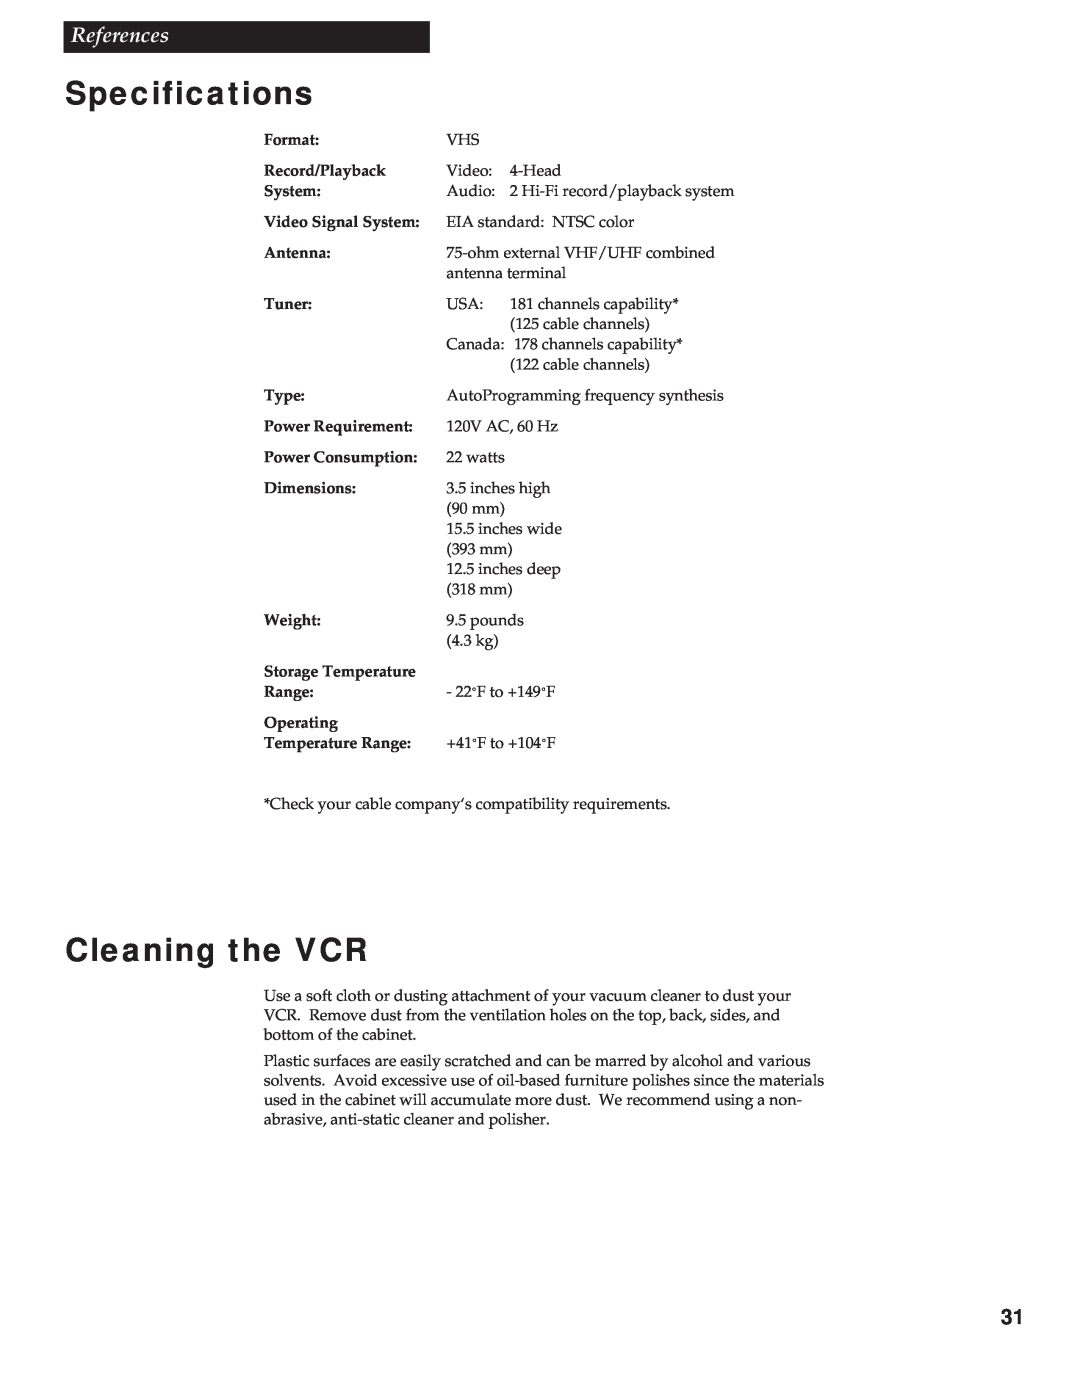 RCA VR618HF manual Specifications, Cleaning the VCR, References 